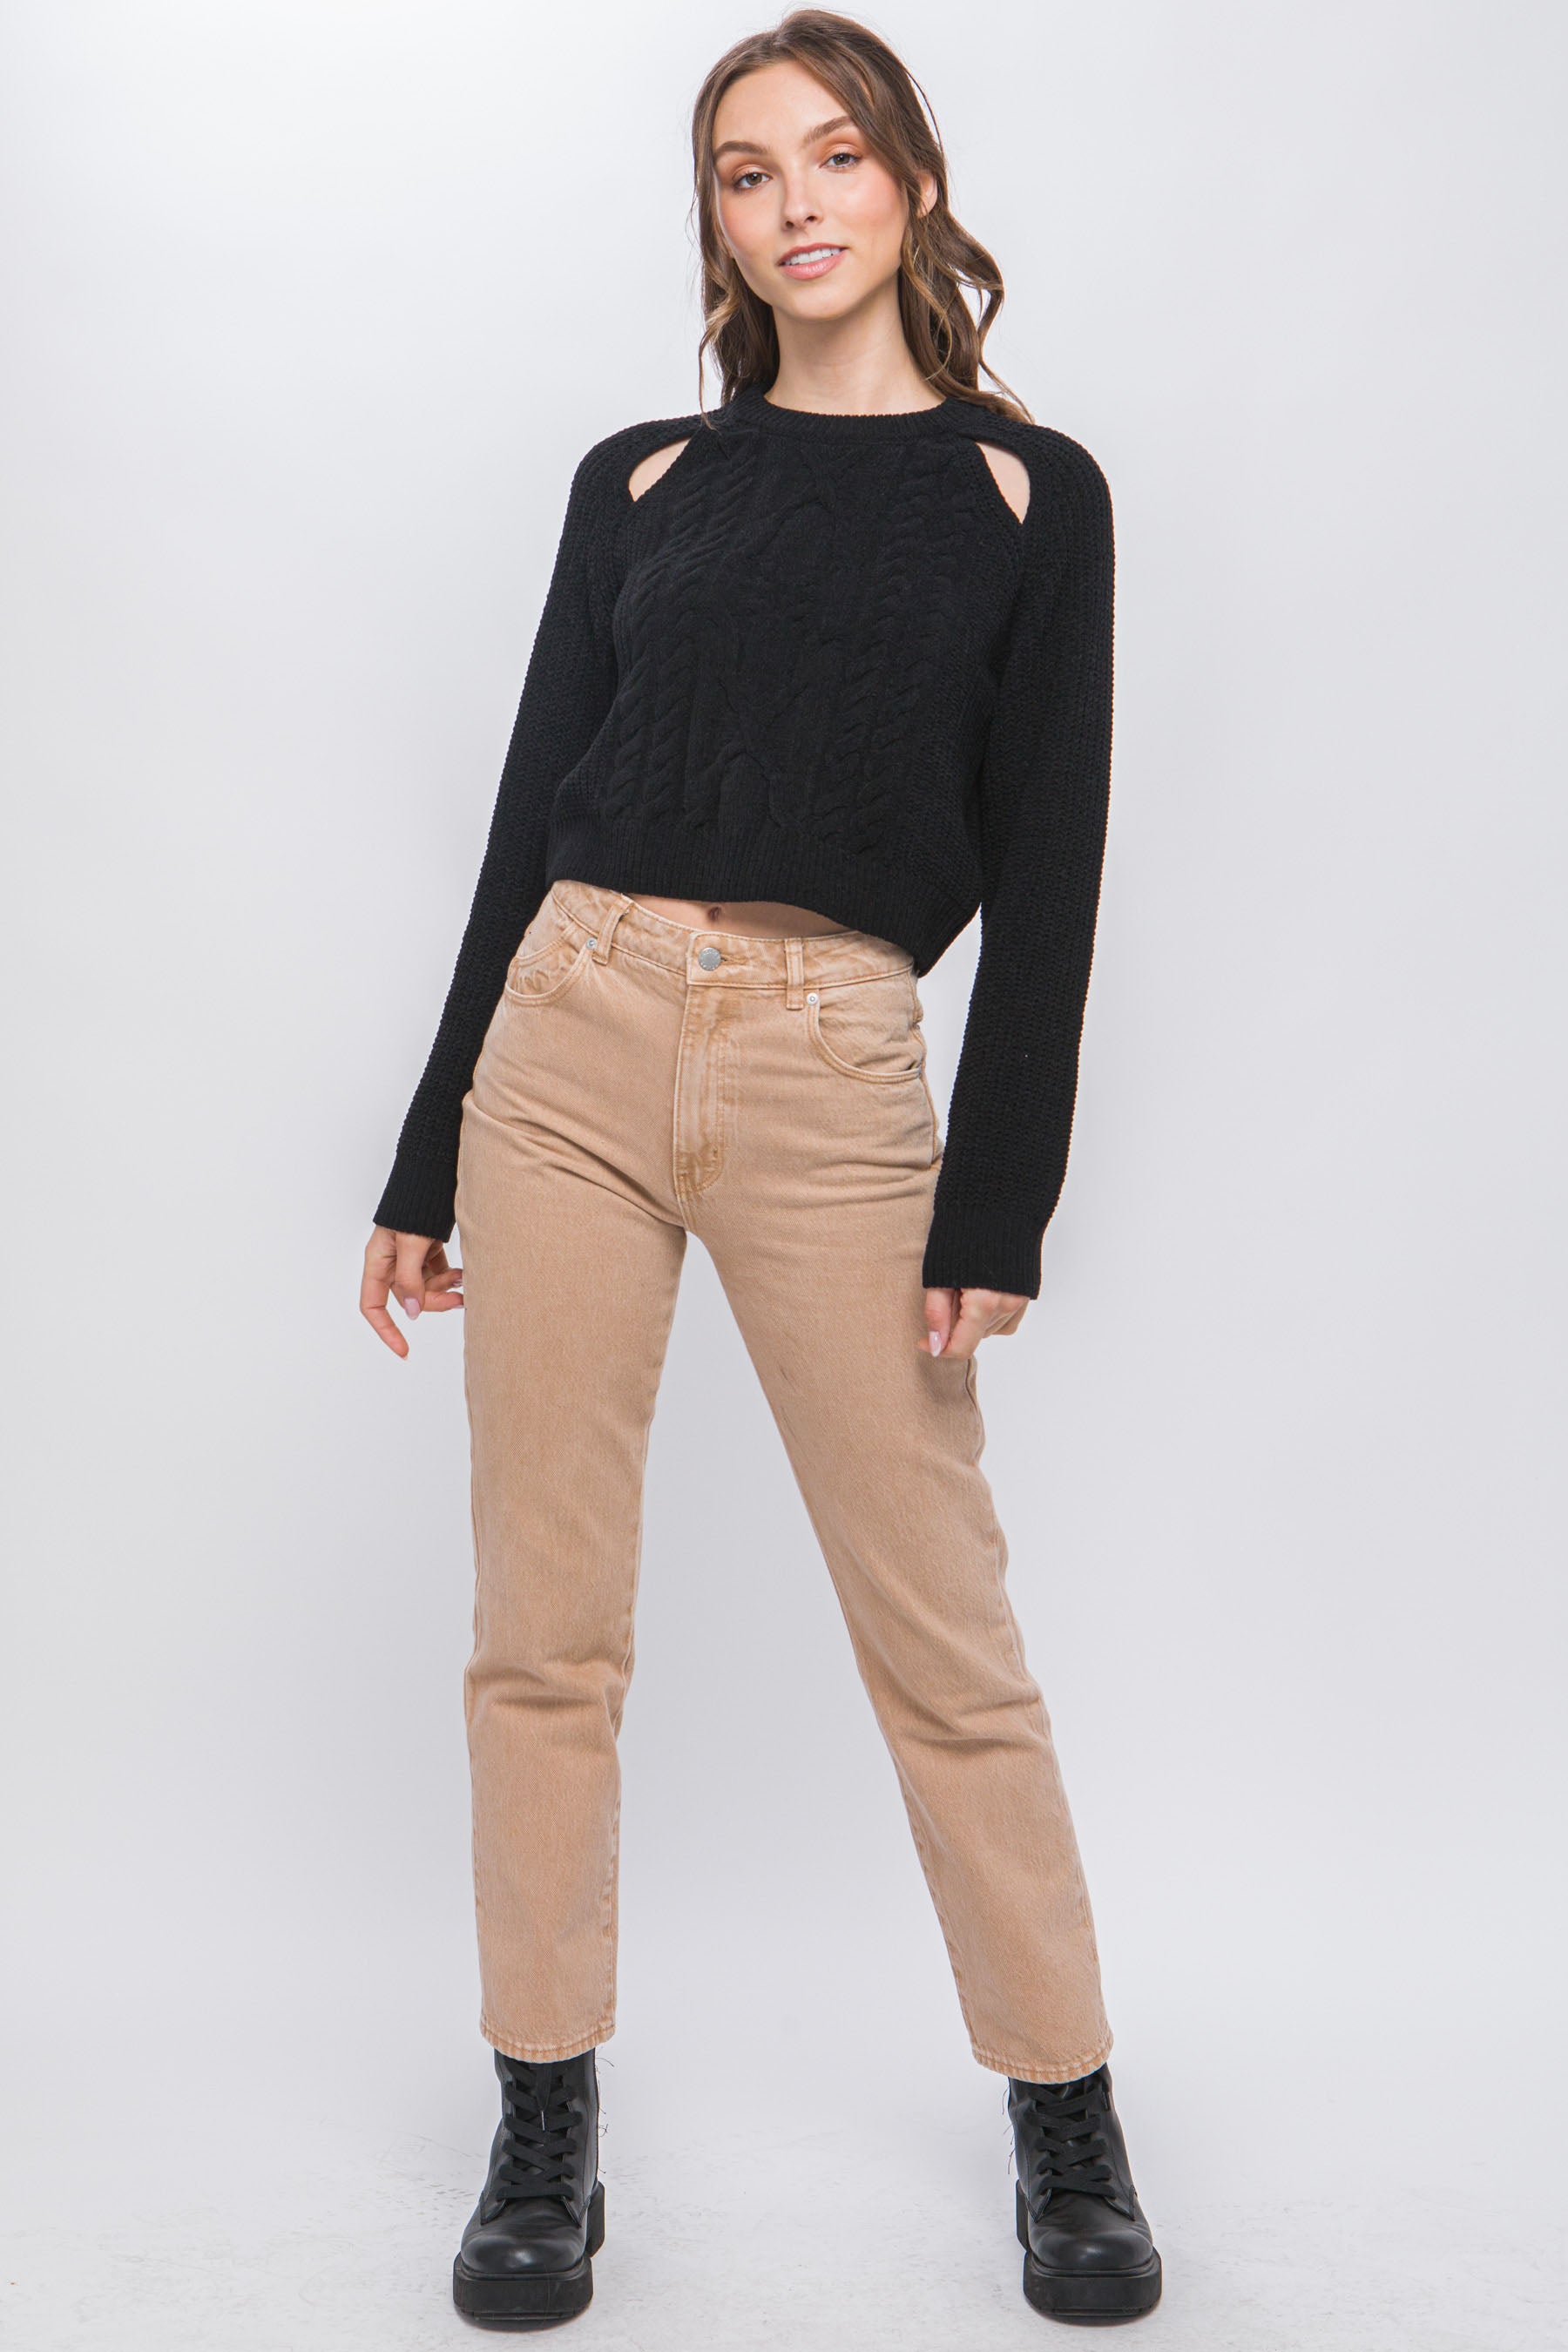 THE FLAMINGLE Knit Pullover Sweater With Cold Shoulder Detail